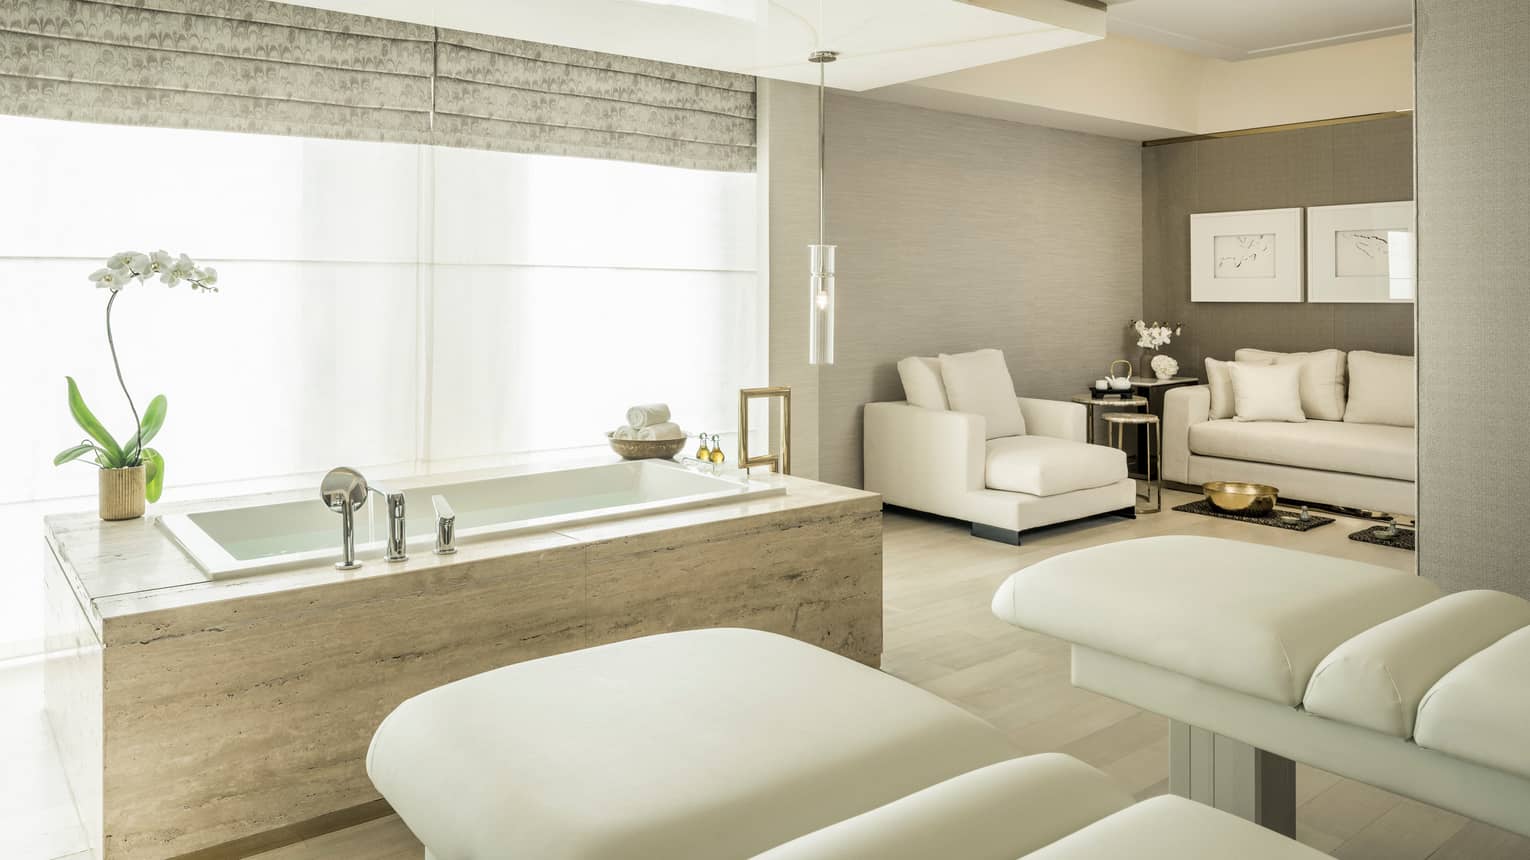 The spa suite with two massage beds, a soaking tub, and a seating area